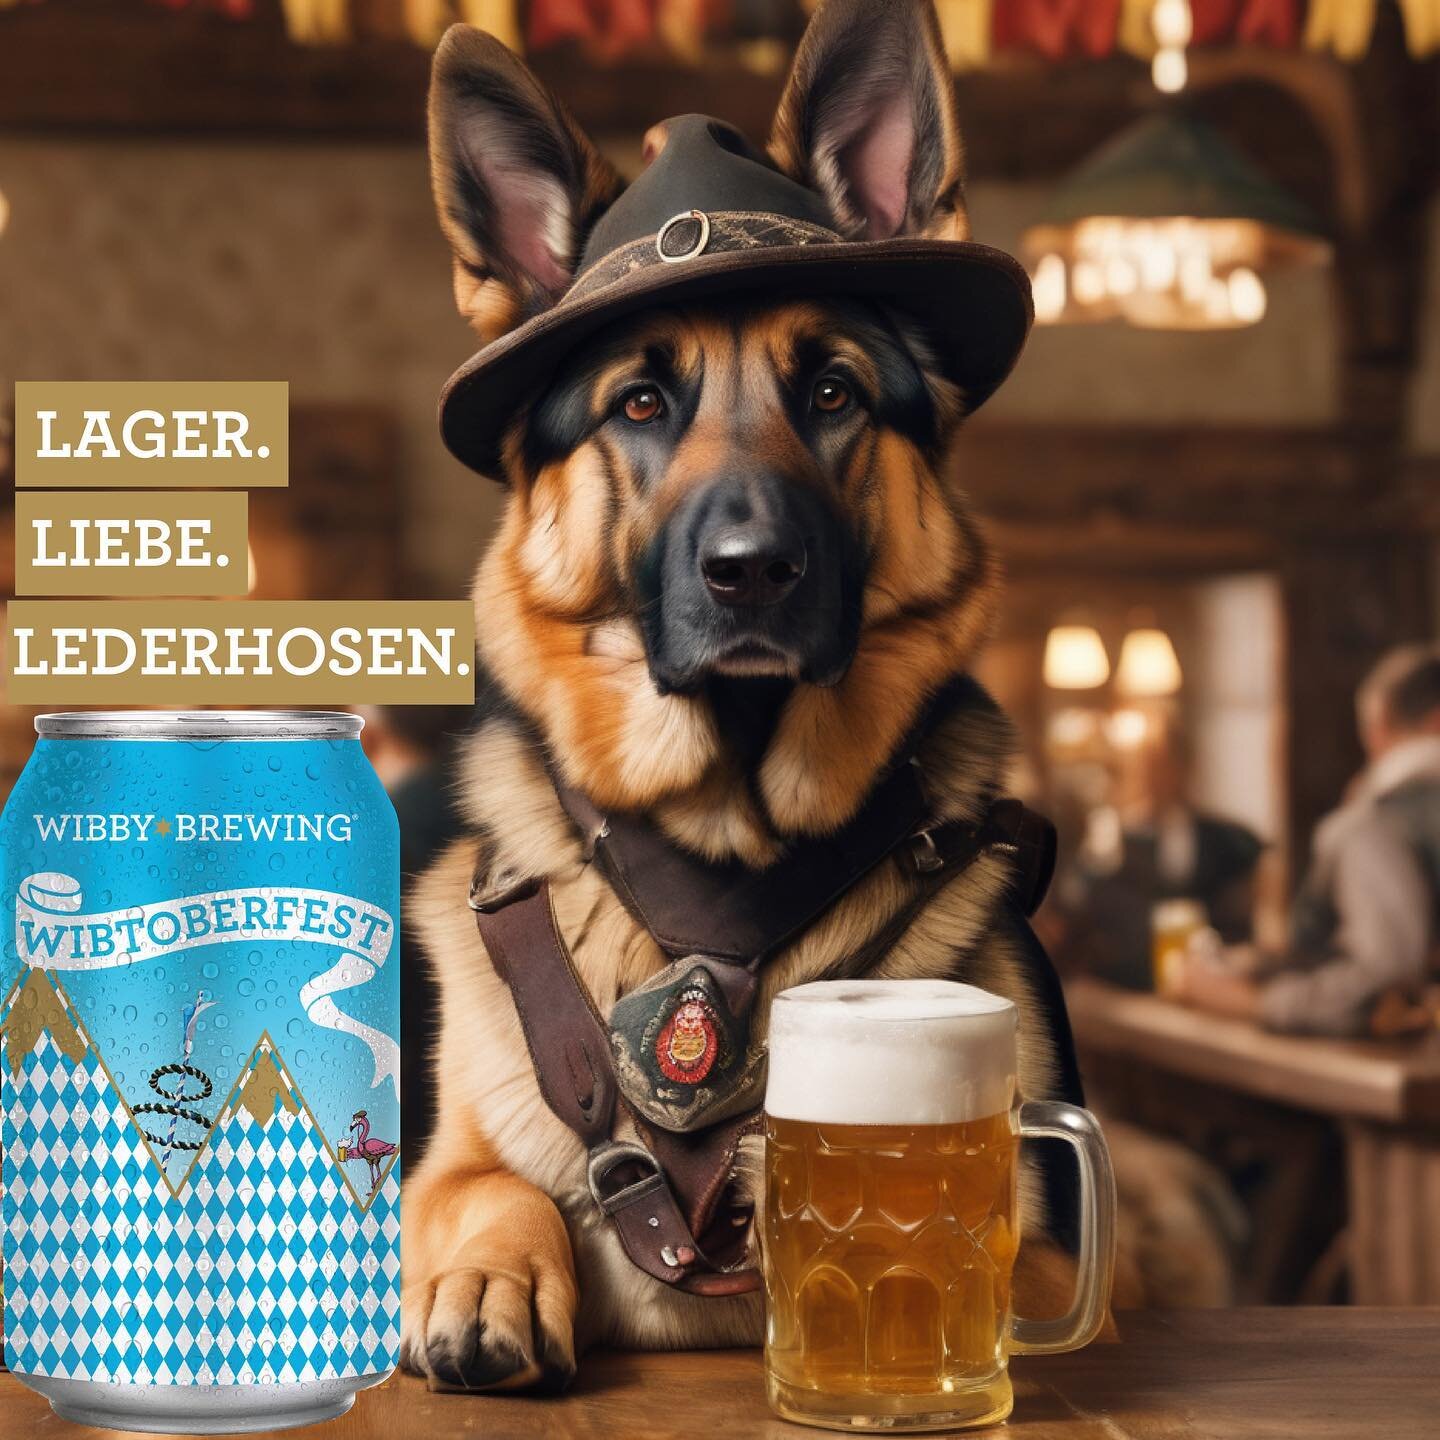 Wibtoberfest is the essence of Oktoberfest-a moment of pure enjoyment, where the flavors of the beer and the camaraderie of the people come together to create an unforgettable experience. Prost!

#wibbybrewing #oktoberfest #wibtoberfest